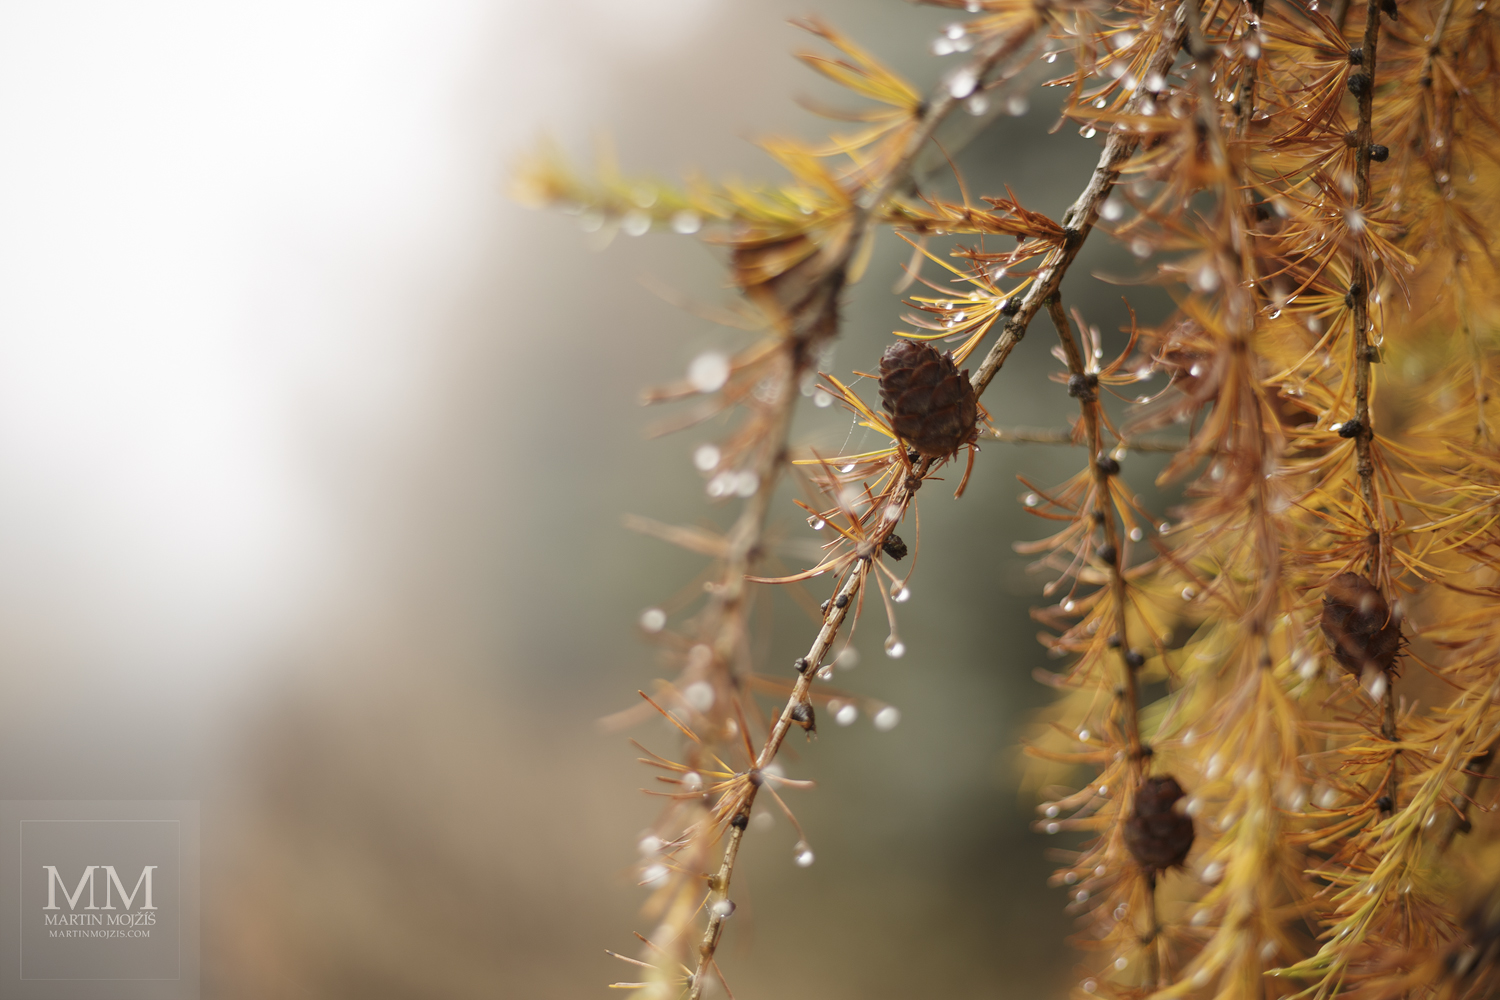 Large format, fine art photograph of larch branches with drops of rain. Martin Mojzis.